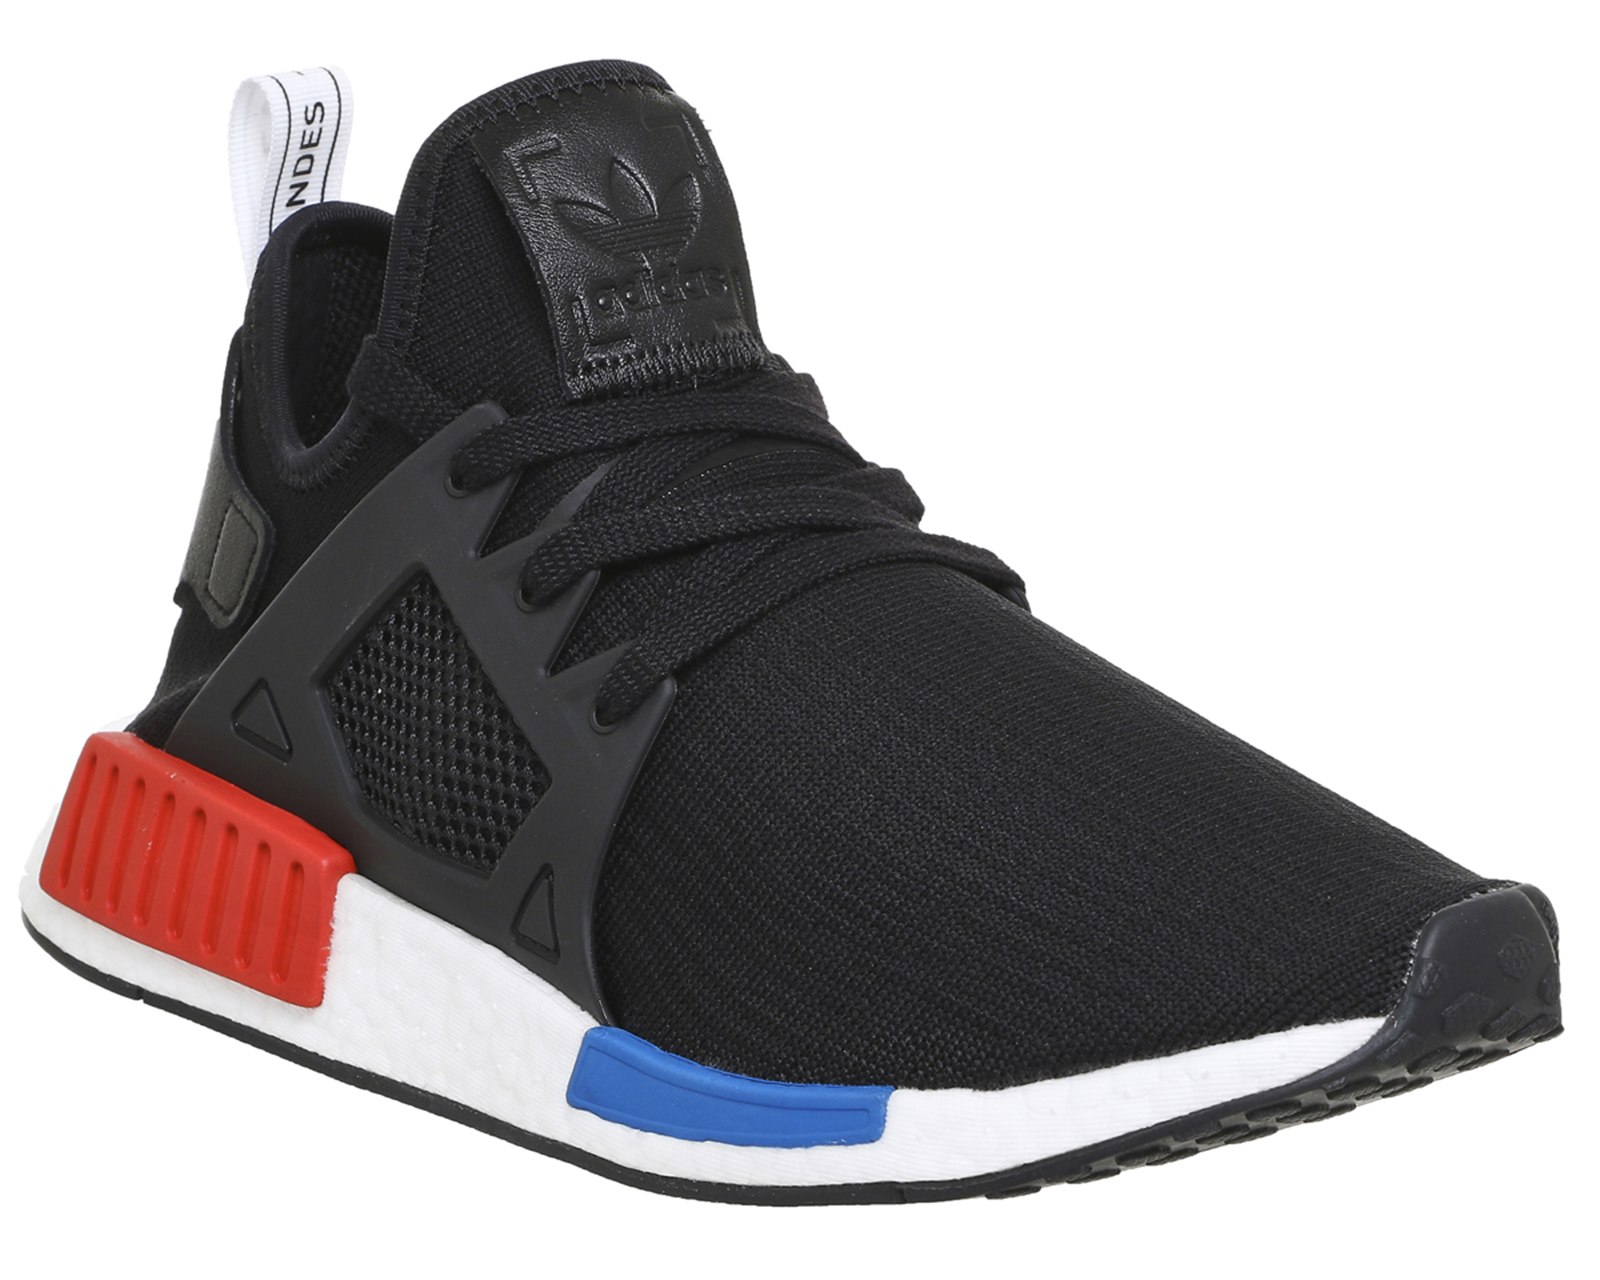 100% Authentic Adidas NMD XR1 Blue Camo size UK.